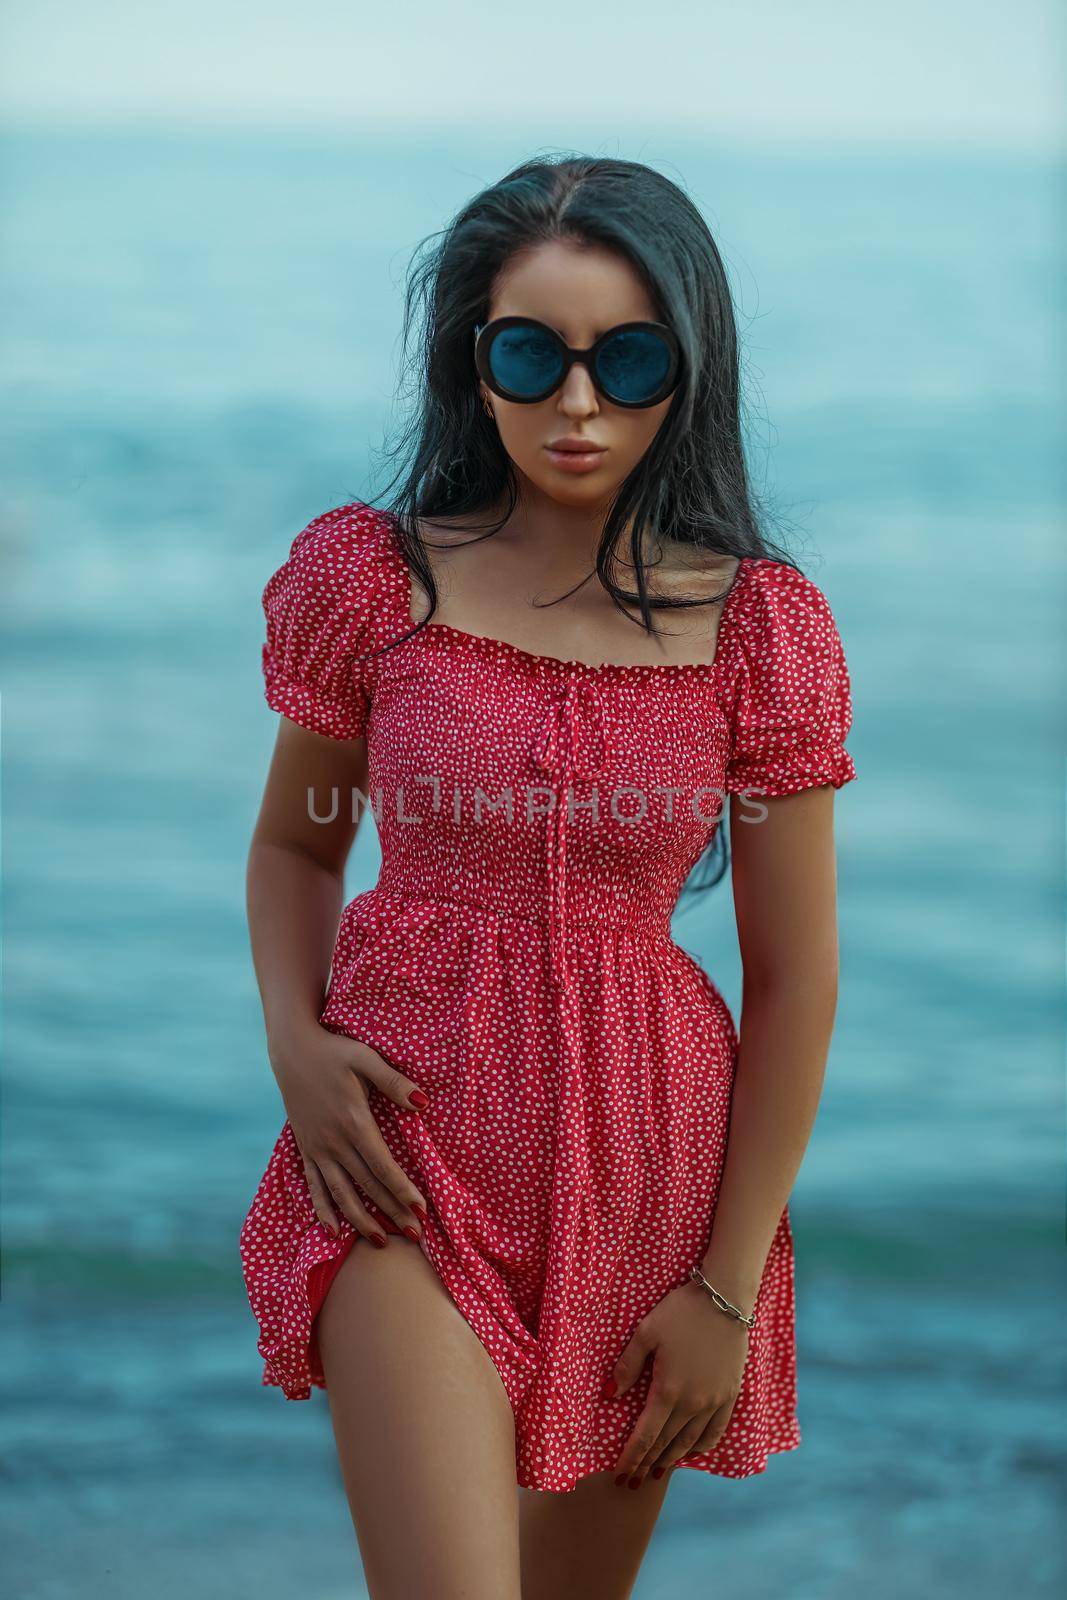 Beautiful girl on the seashore in a red dress with polka dots by but_photo